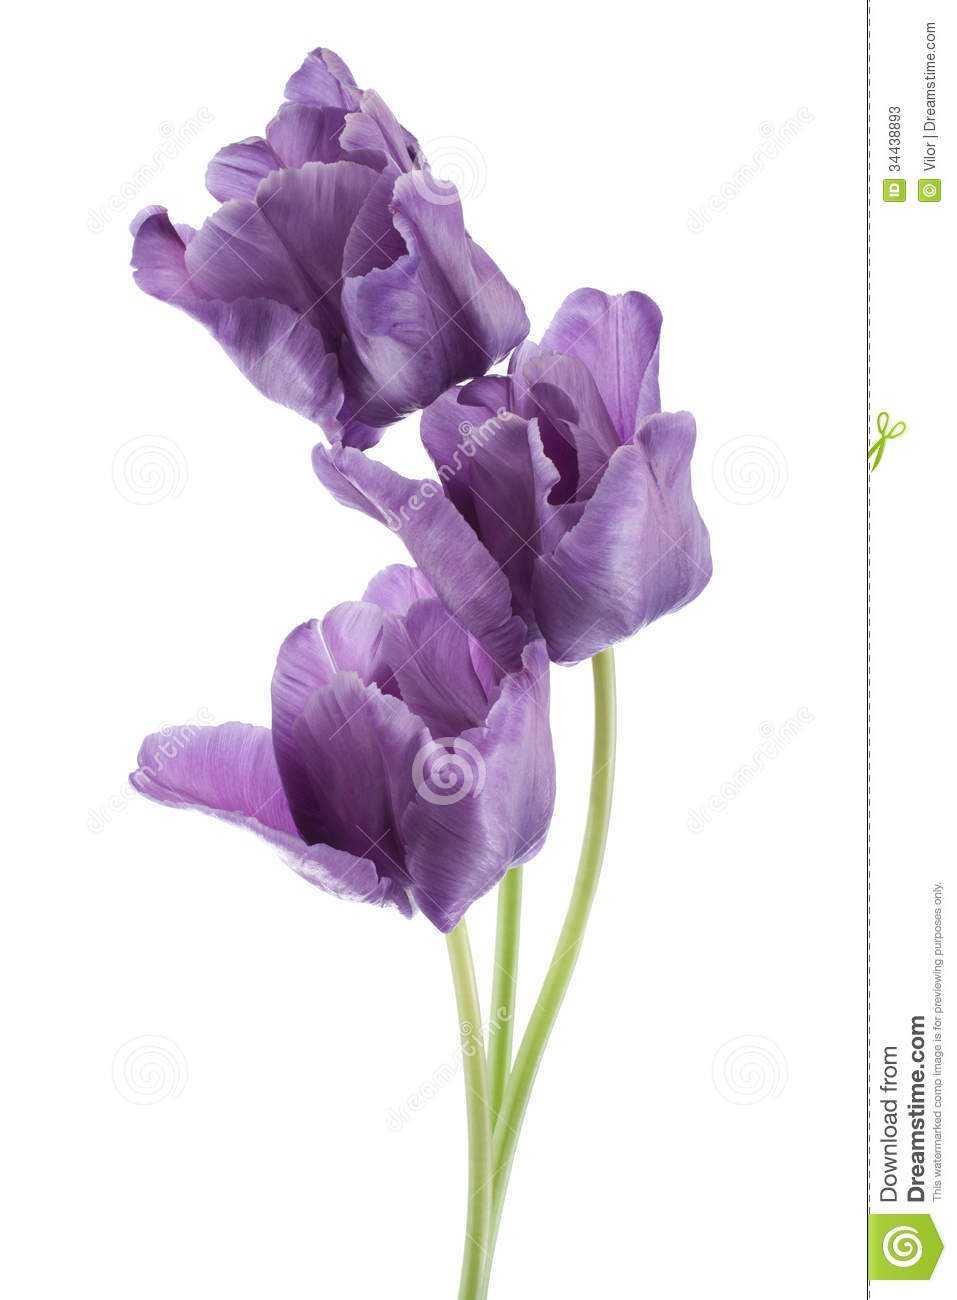 Studio Shot Of Blue Colored Tulip Flowers Isolated On White Background    